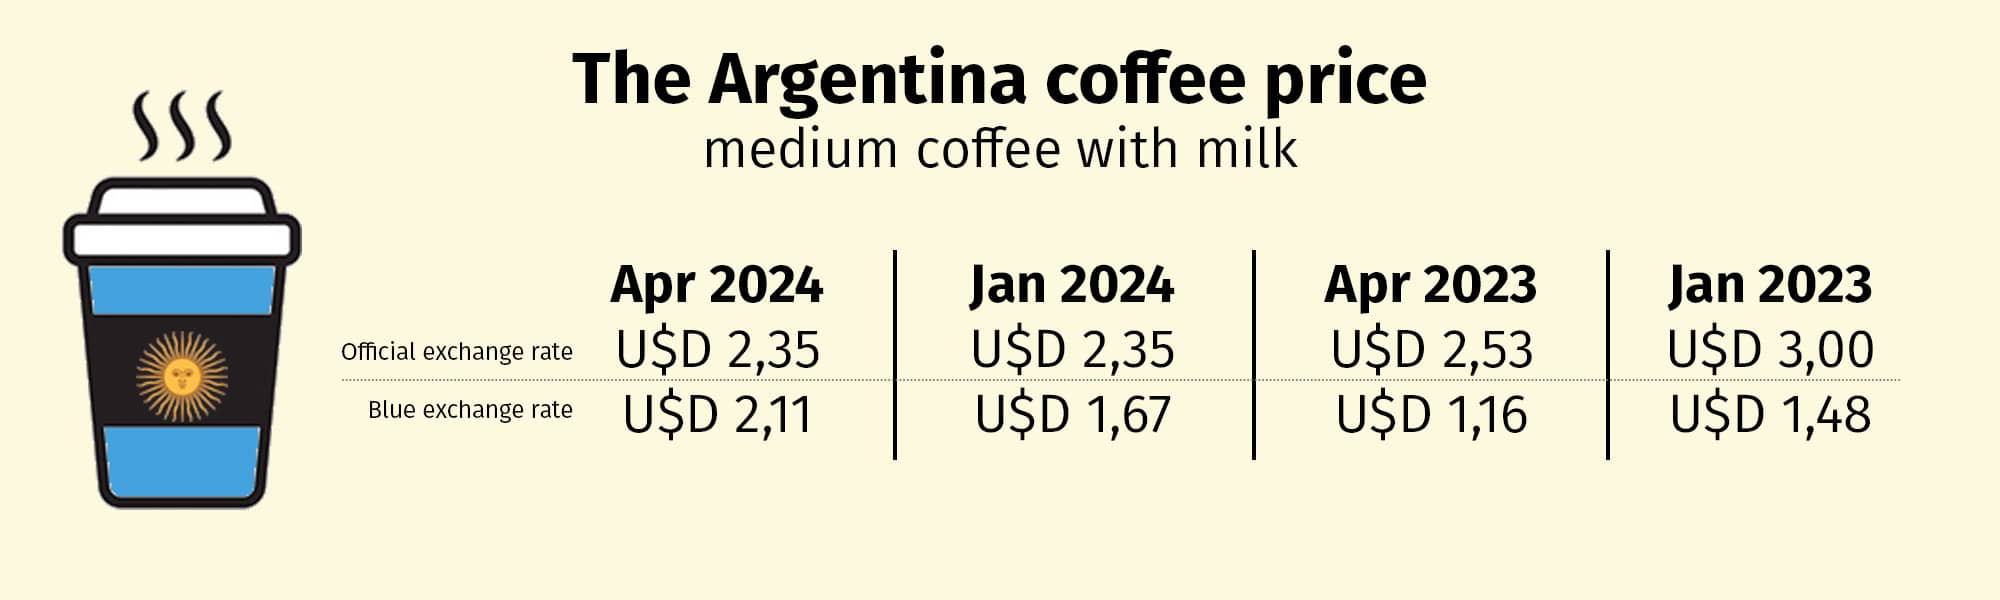 Coffee price in Argentina expensive to travel